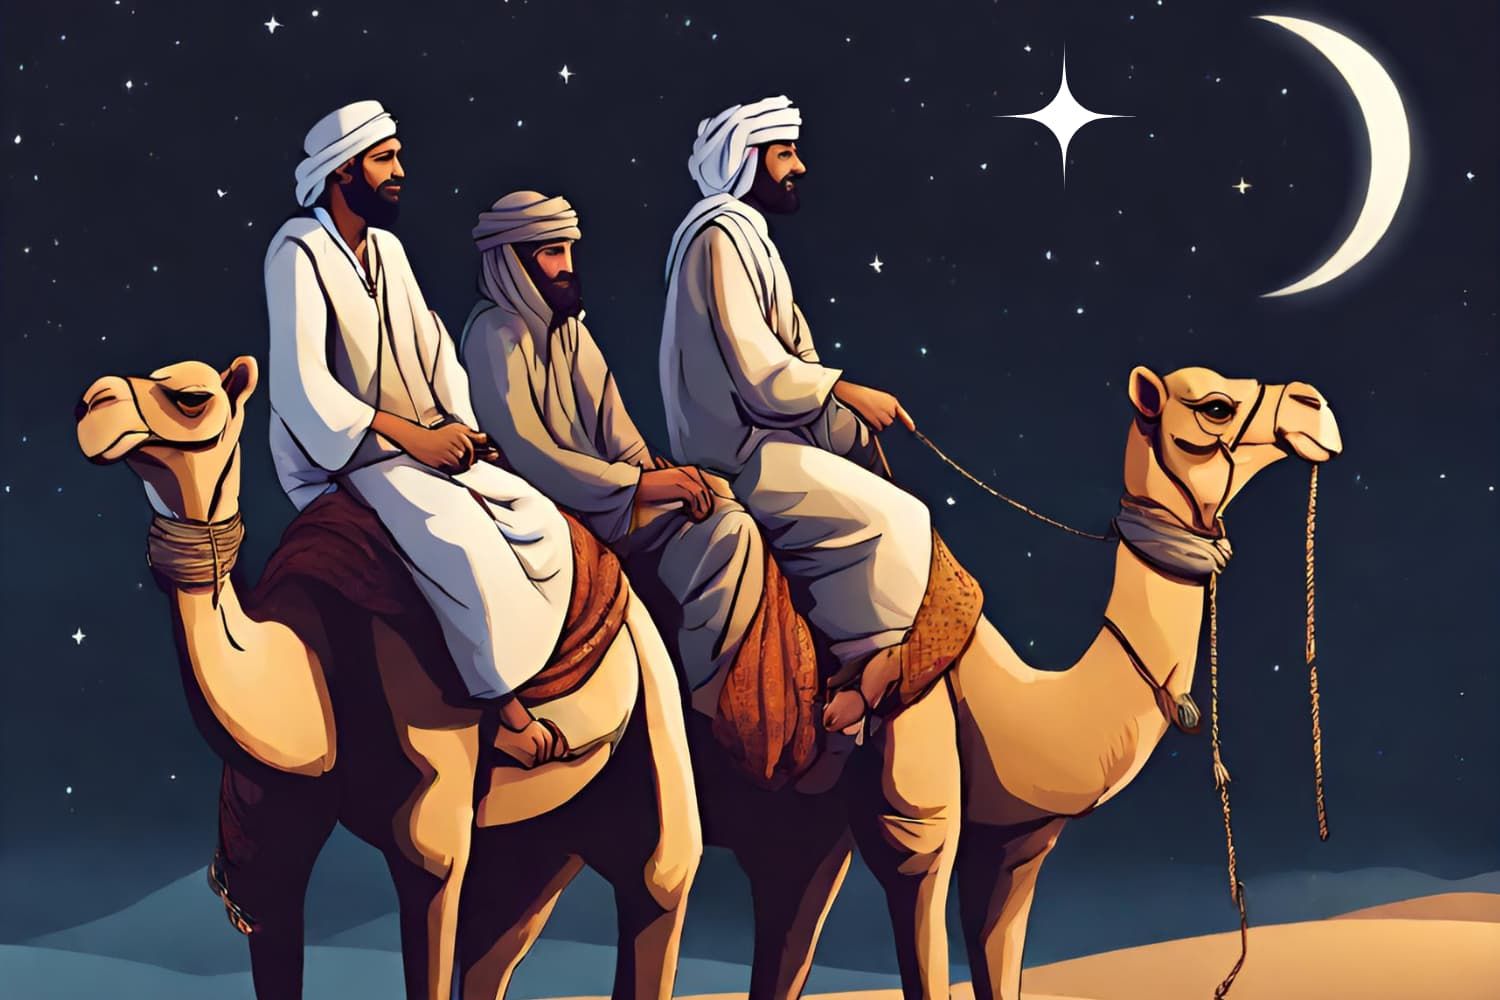 Lesson%20-%20NT%20Christmas%209%20-%20Three%20wise%20men%20following%20the%20star%202-7d10ce8f Christmas: The birth of Jesus